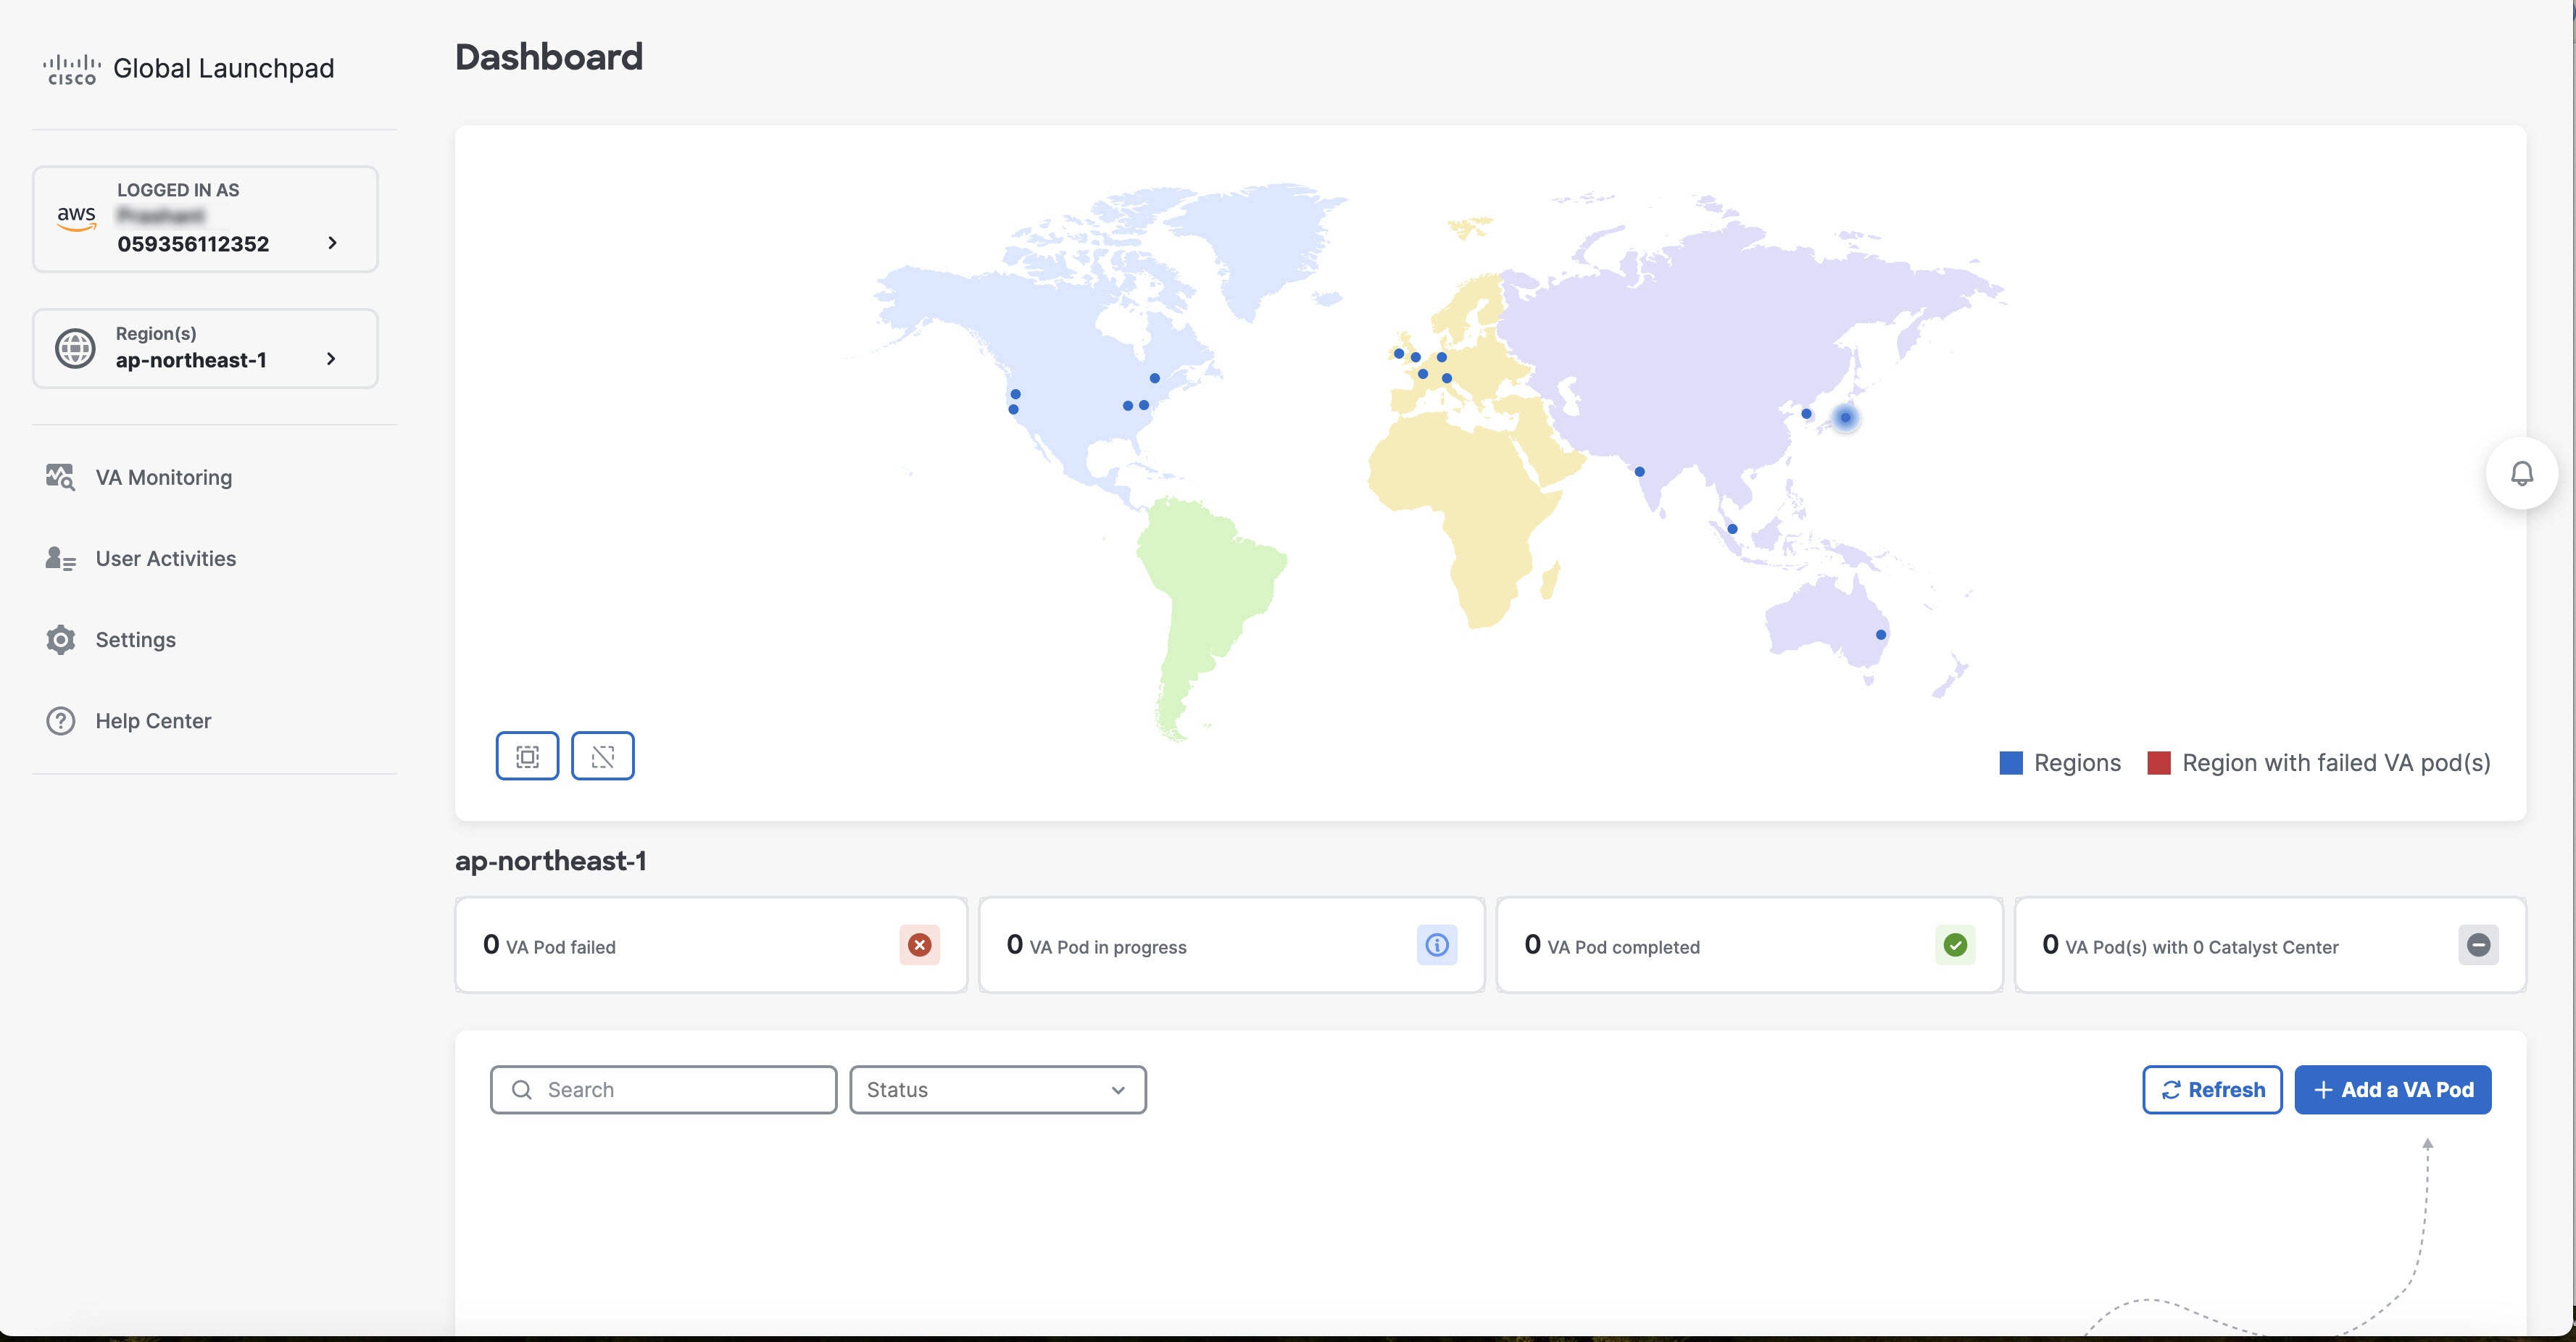 By default, Cisco Global Launchpad displays the navigation pane on the left and the Dashboard pane on the right. The Dashboard pane displays a map of the regions and VA pods and below the map, displays all created VA pods.